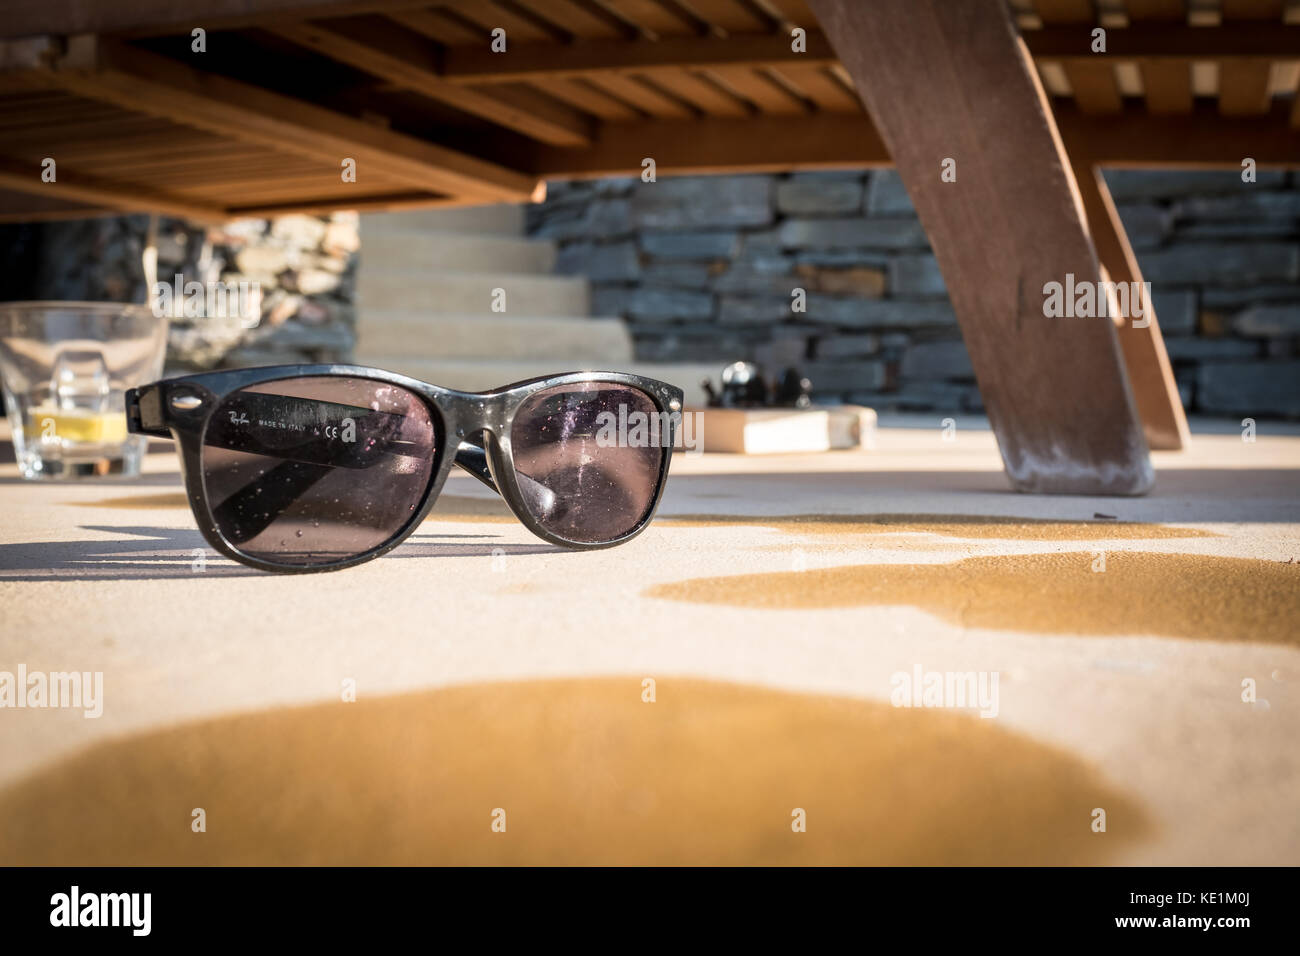 Ray-Ban sunglasses on side of swimming pool Stock Photo - Alamy